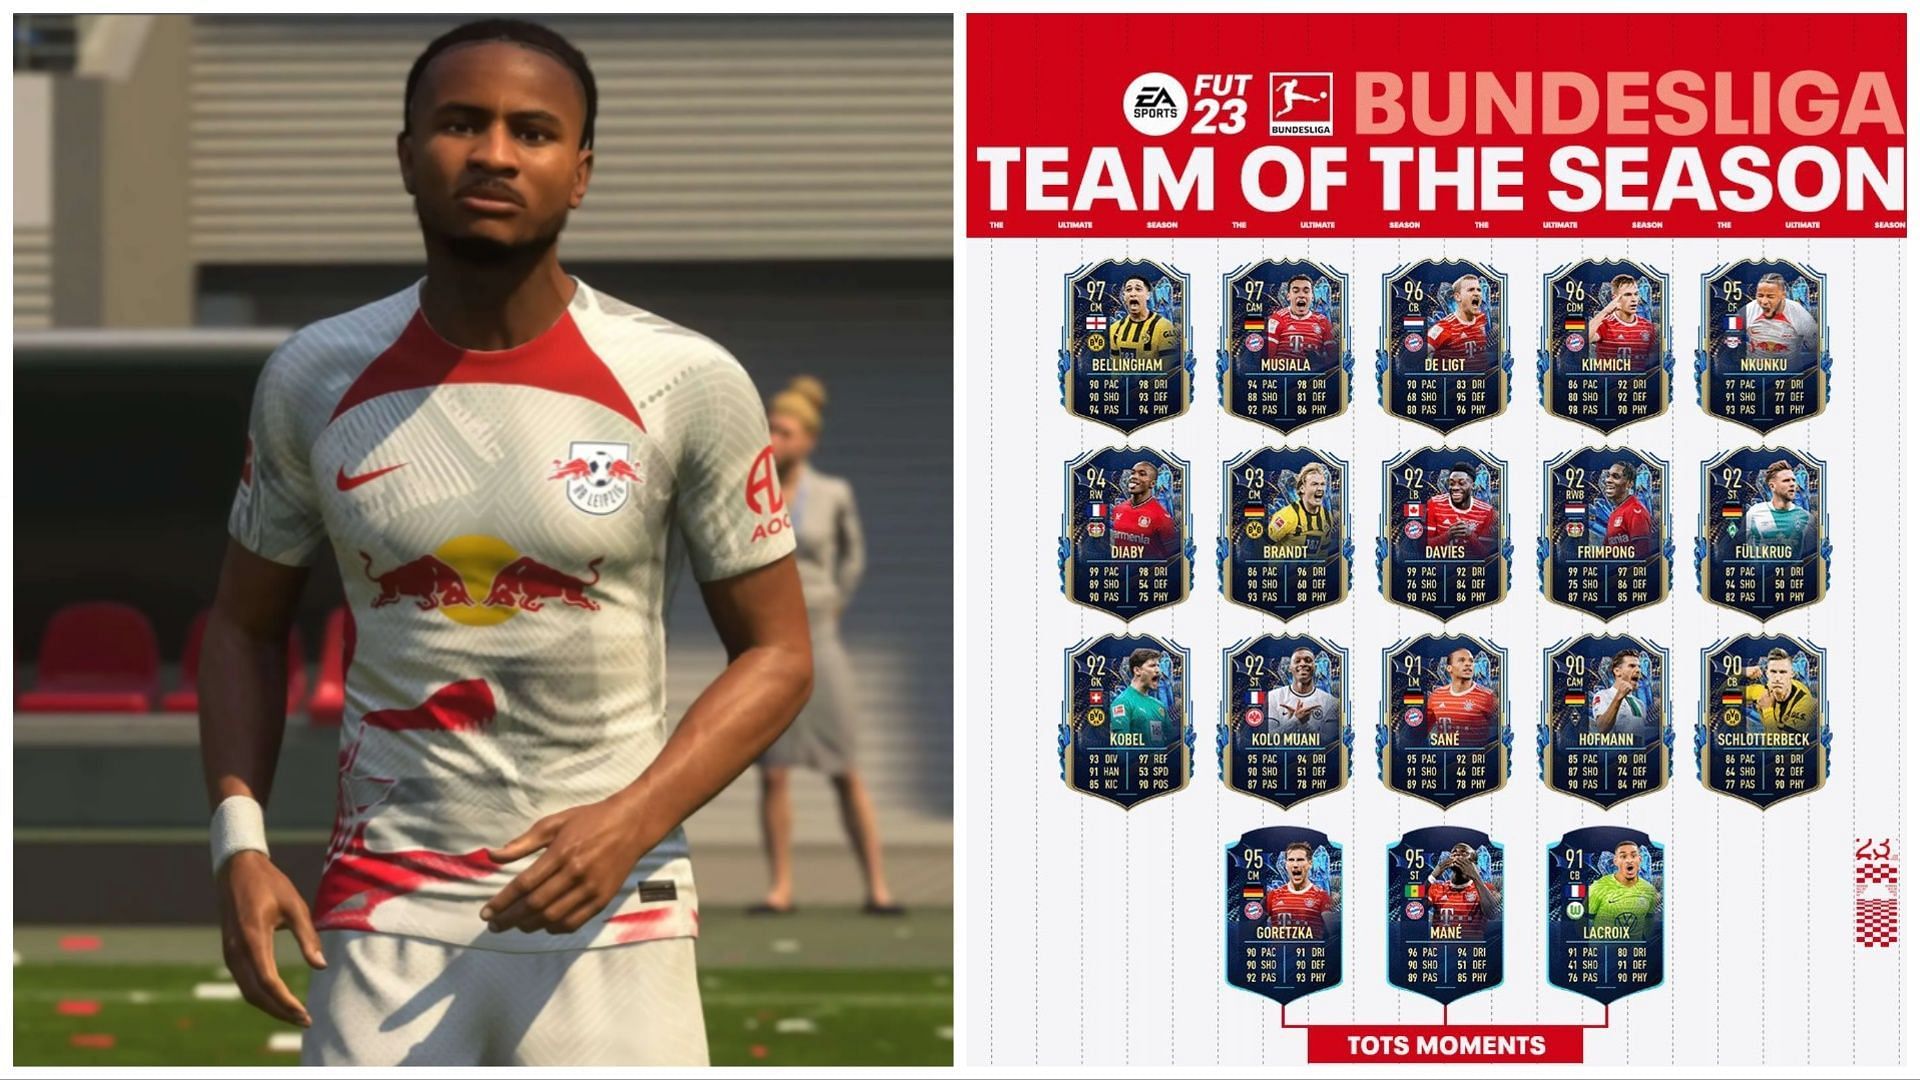 These Bundesliga TOTS players are incredible (Images via EA Sports)